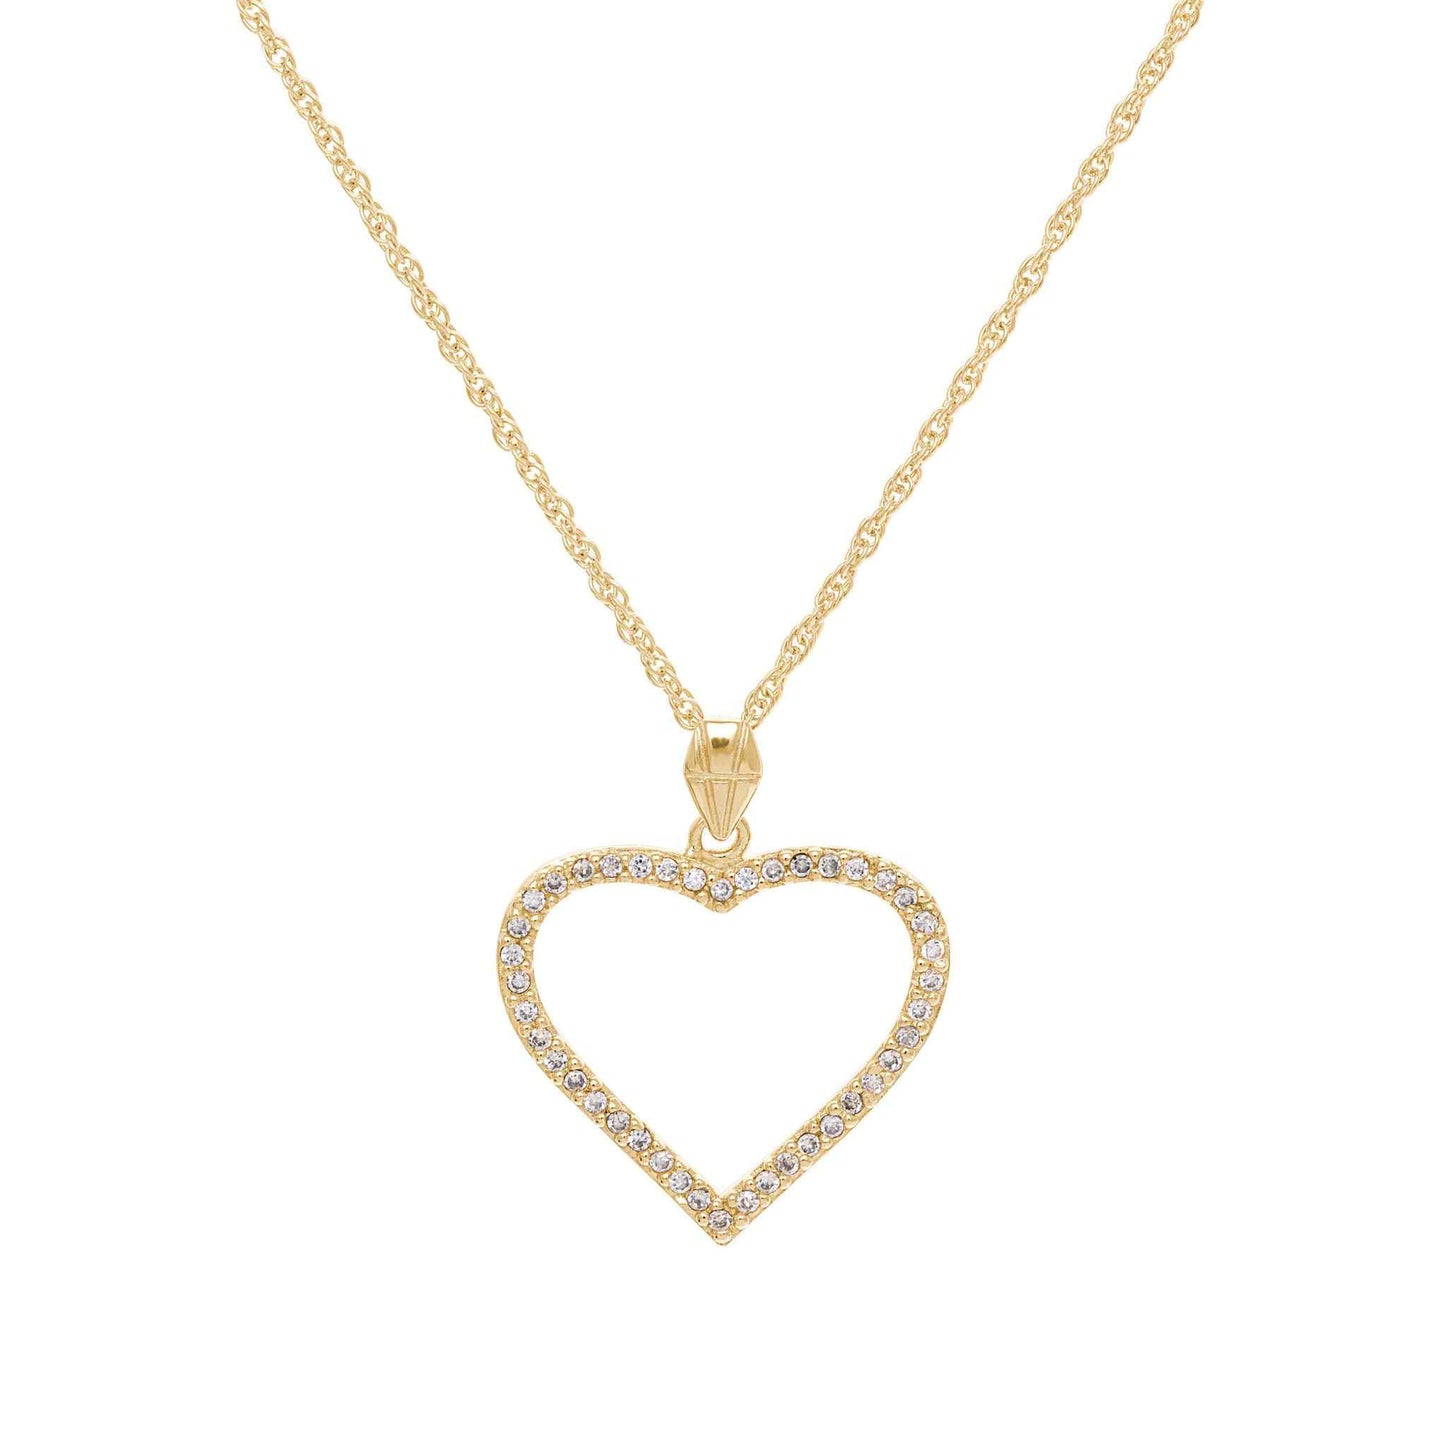 A simulated diamond heart necklace displayed on a neutral white background.